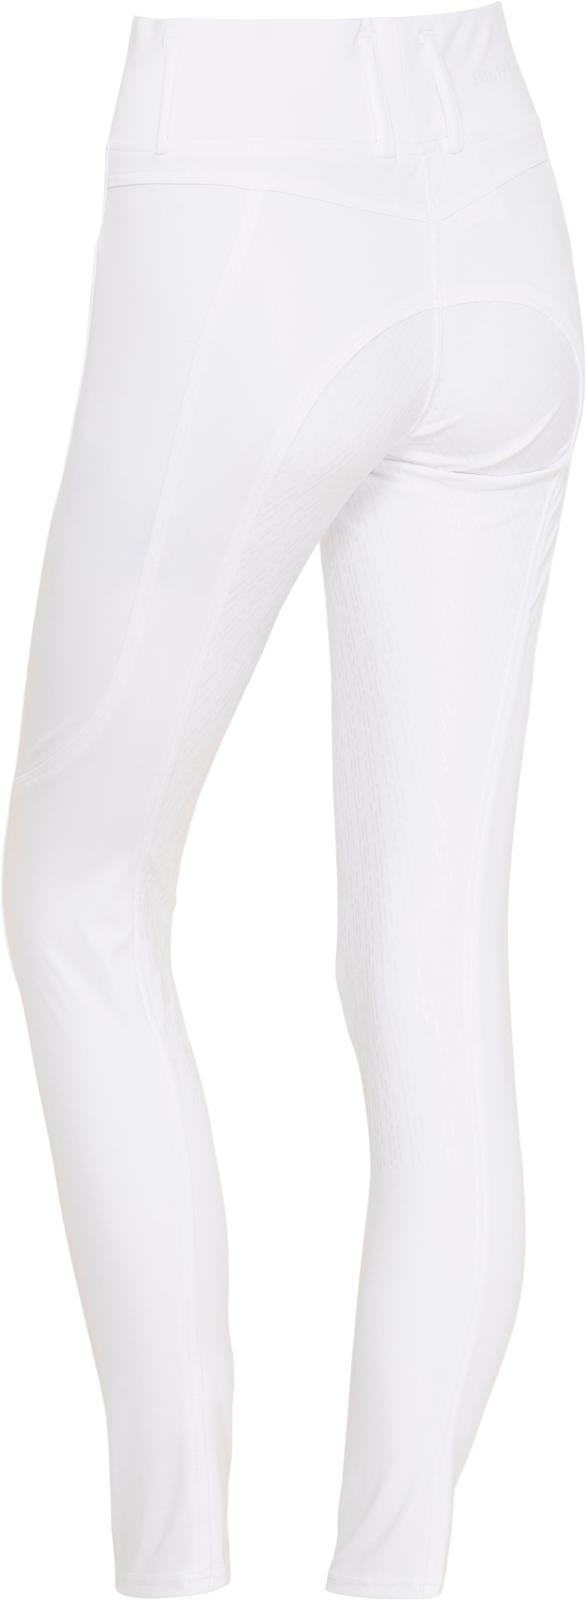 Equipage Kalea Full Grip Tights